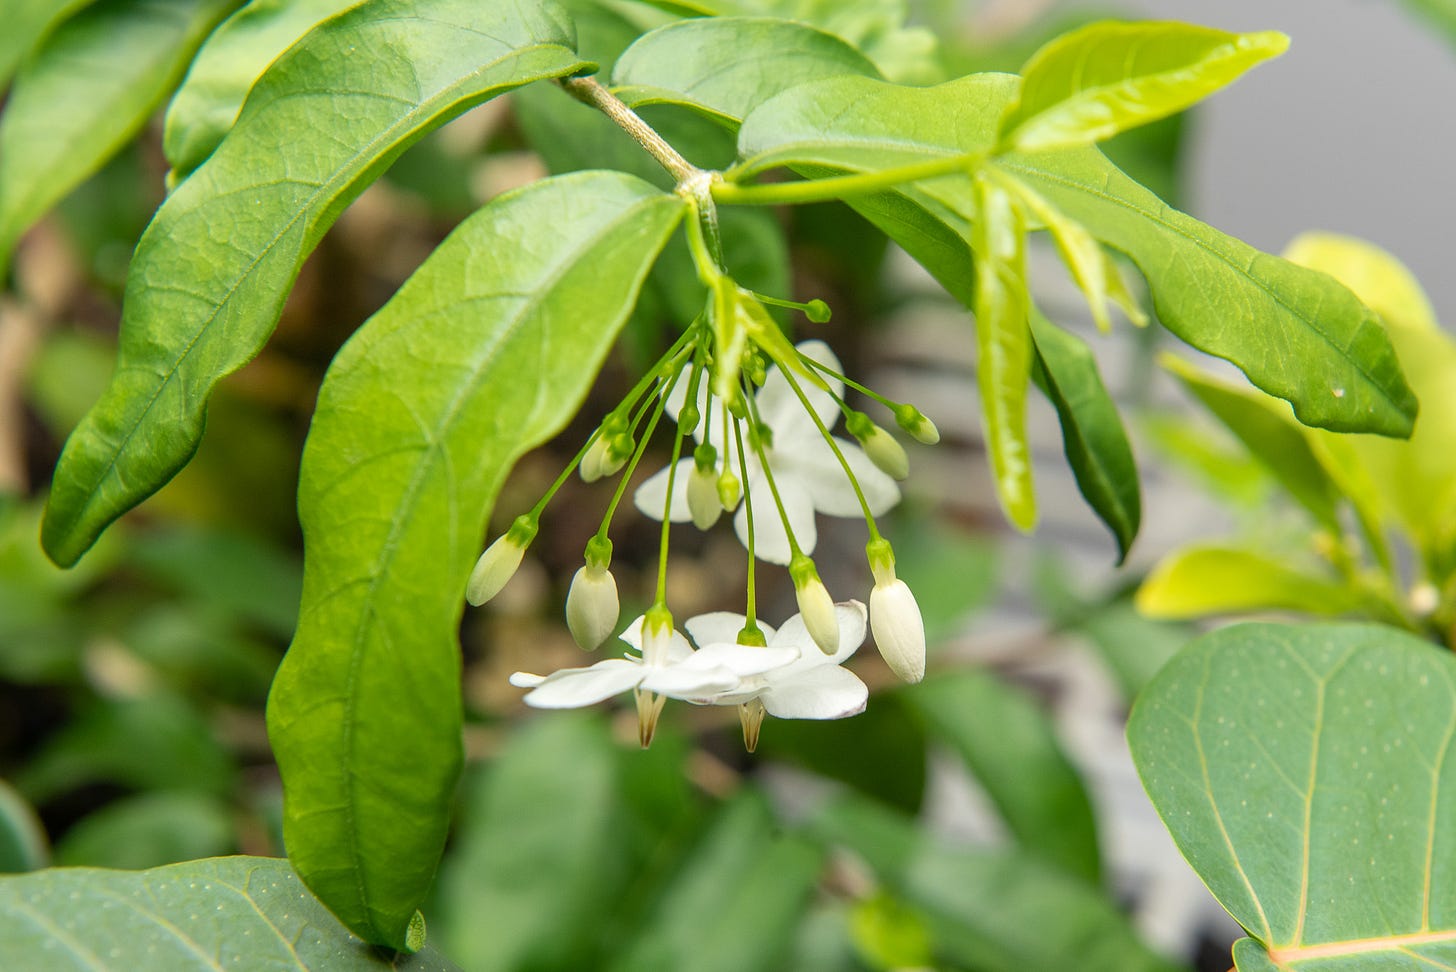 ID: Close up of water jasmine flowers, hanging beneath the leaves